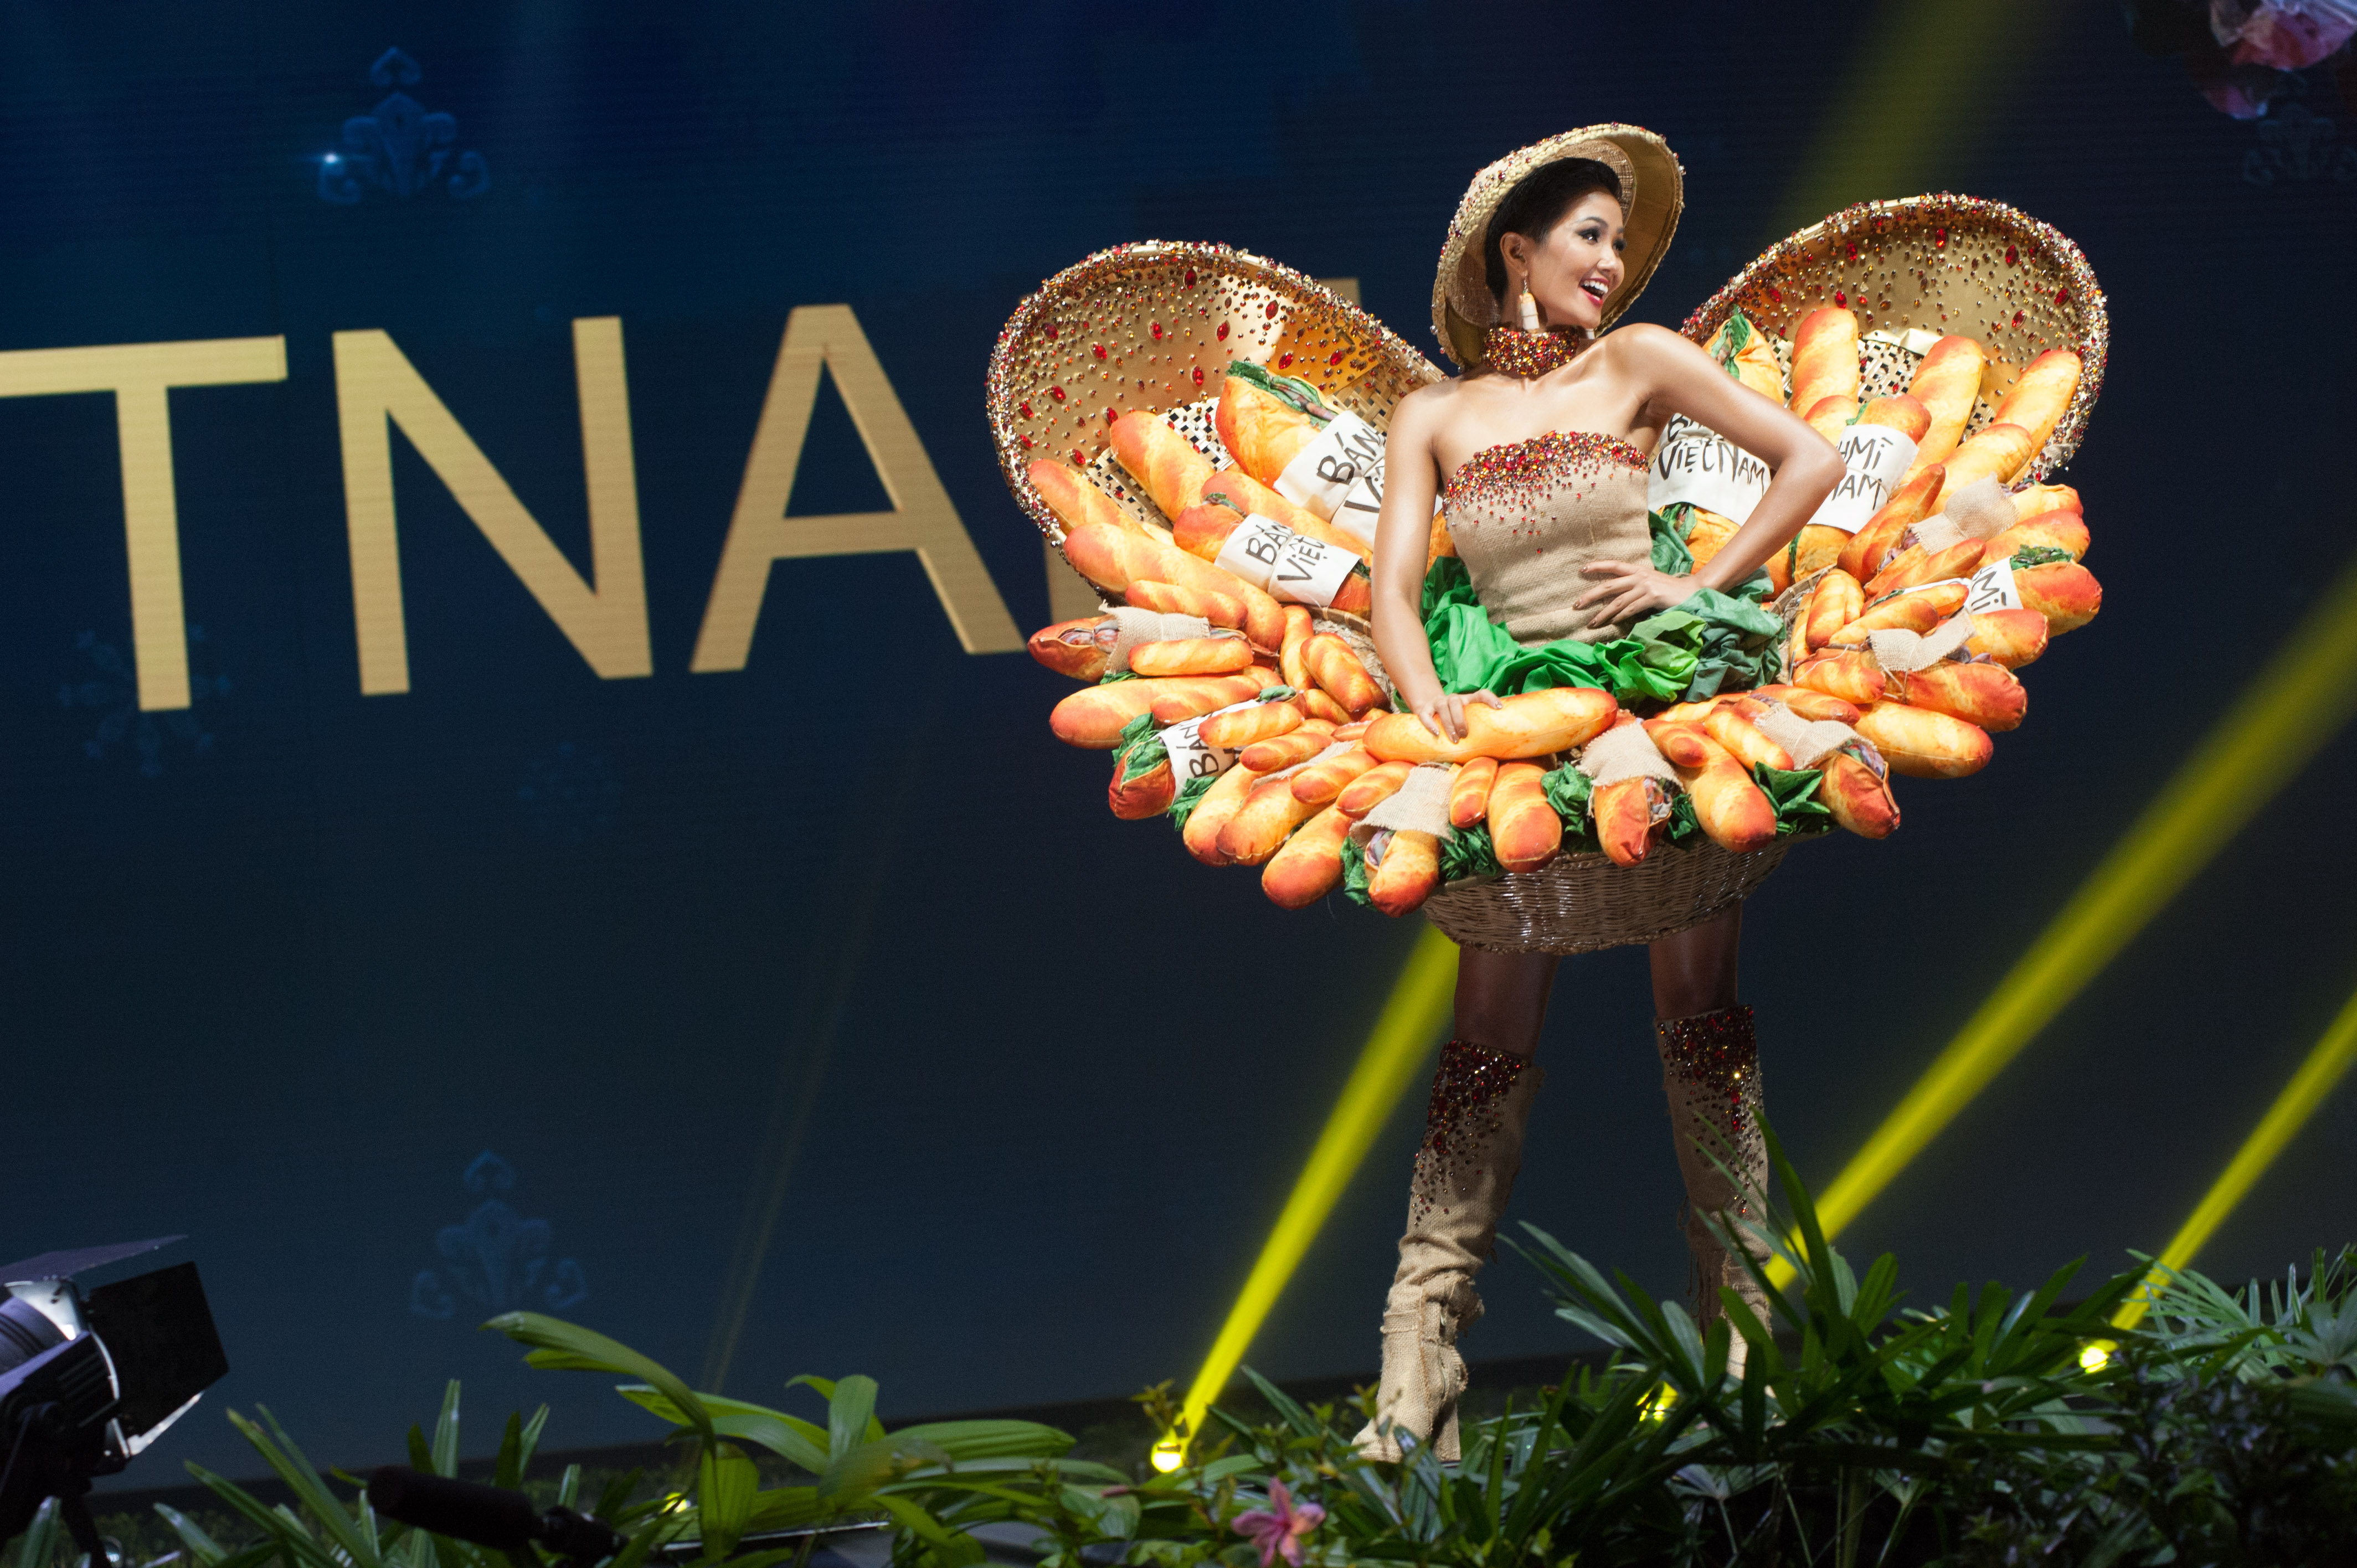 H'Hen Nie, Miss Vietnam 2018 on stage during the National Costume Show, an international tradition where contestants display an authentic costume of choice that best represents the culture of their home country, on December 10th at Nongnooch Pattaya International Convention Exhibition (NICE). The Miss Universe contestants are touring, filming, rehearsing and preparing to compete for the Miss Universe crown in Bangkok, Thailand. Tune in to the FOX telecast at 7:00 PM ET live/PT tape-delayed on Sunday, December 16, 2018 from the IMPACT Arena in Bangkok, Thailand to see who will become the next Miss Universe. HO/The Miss Universe Organization